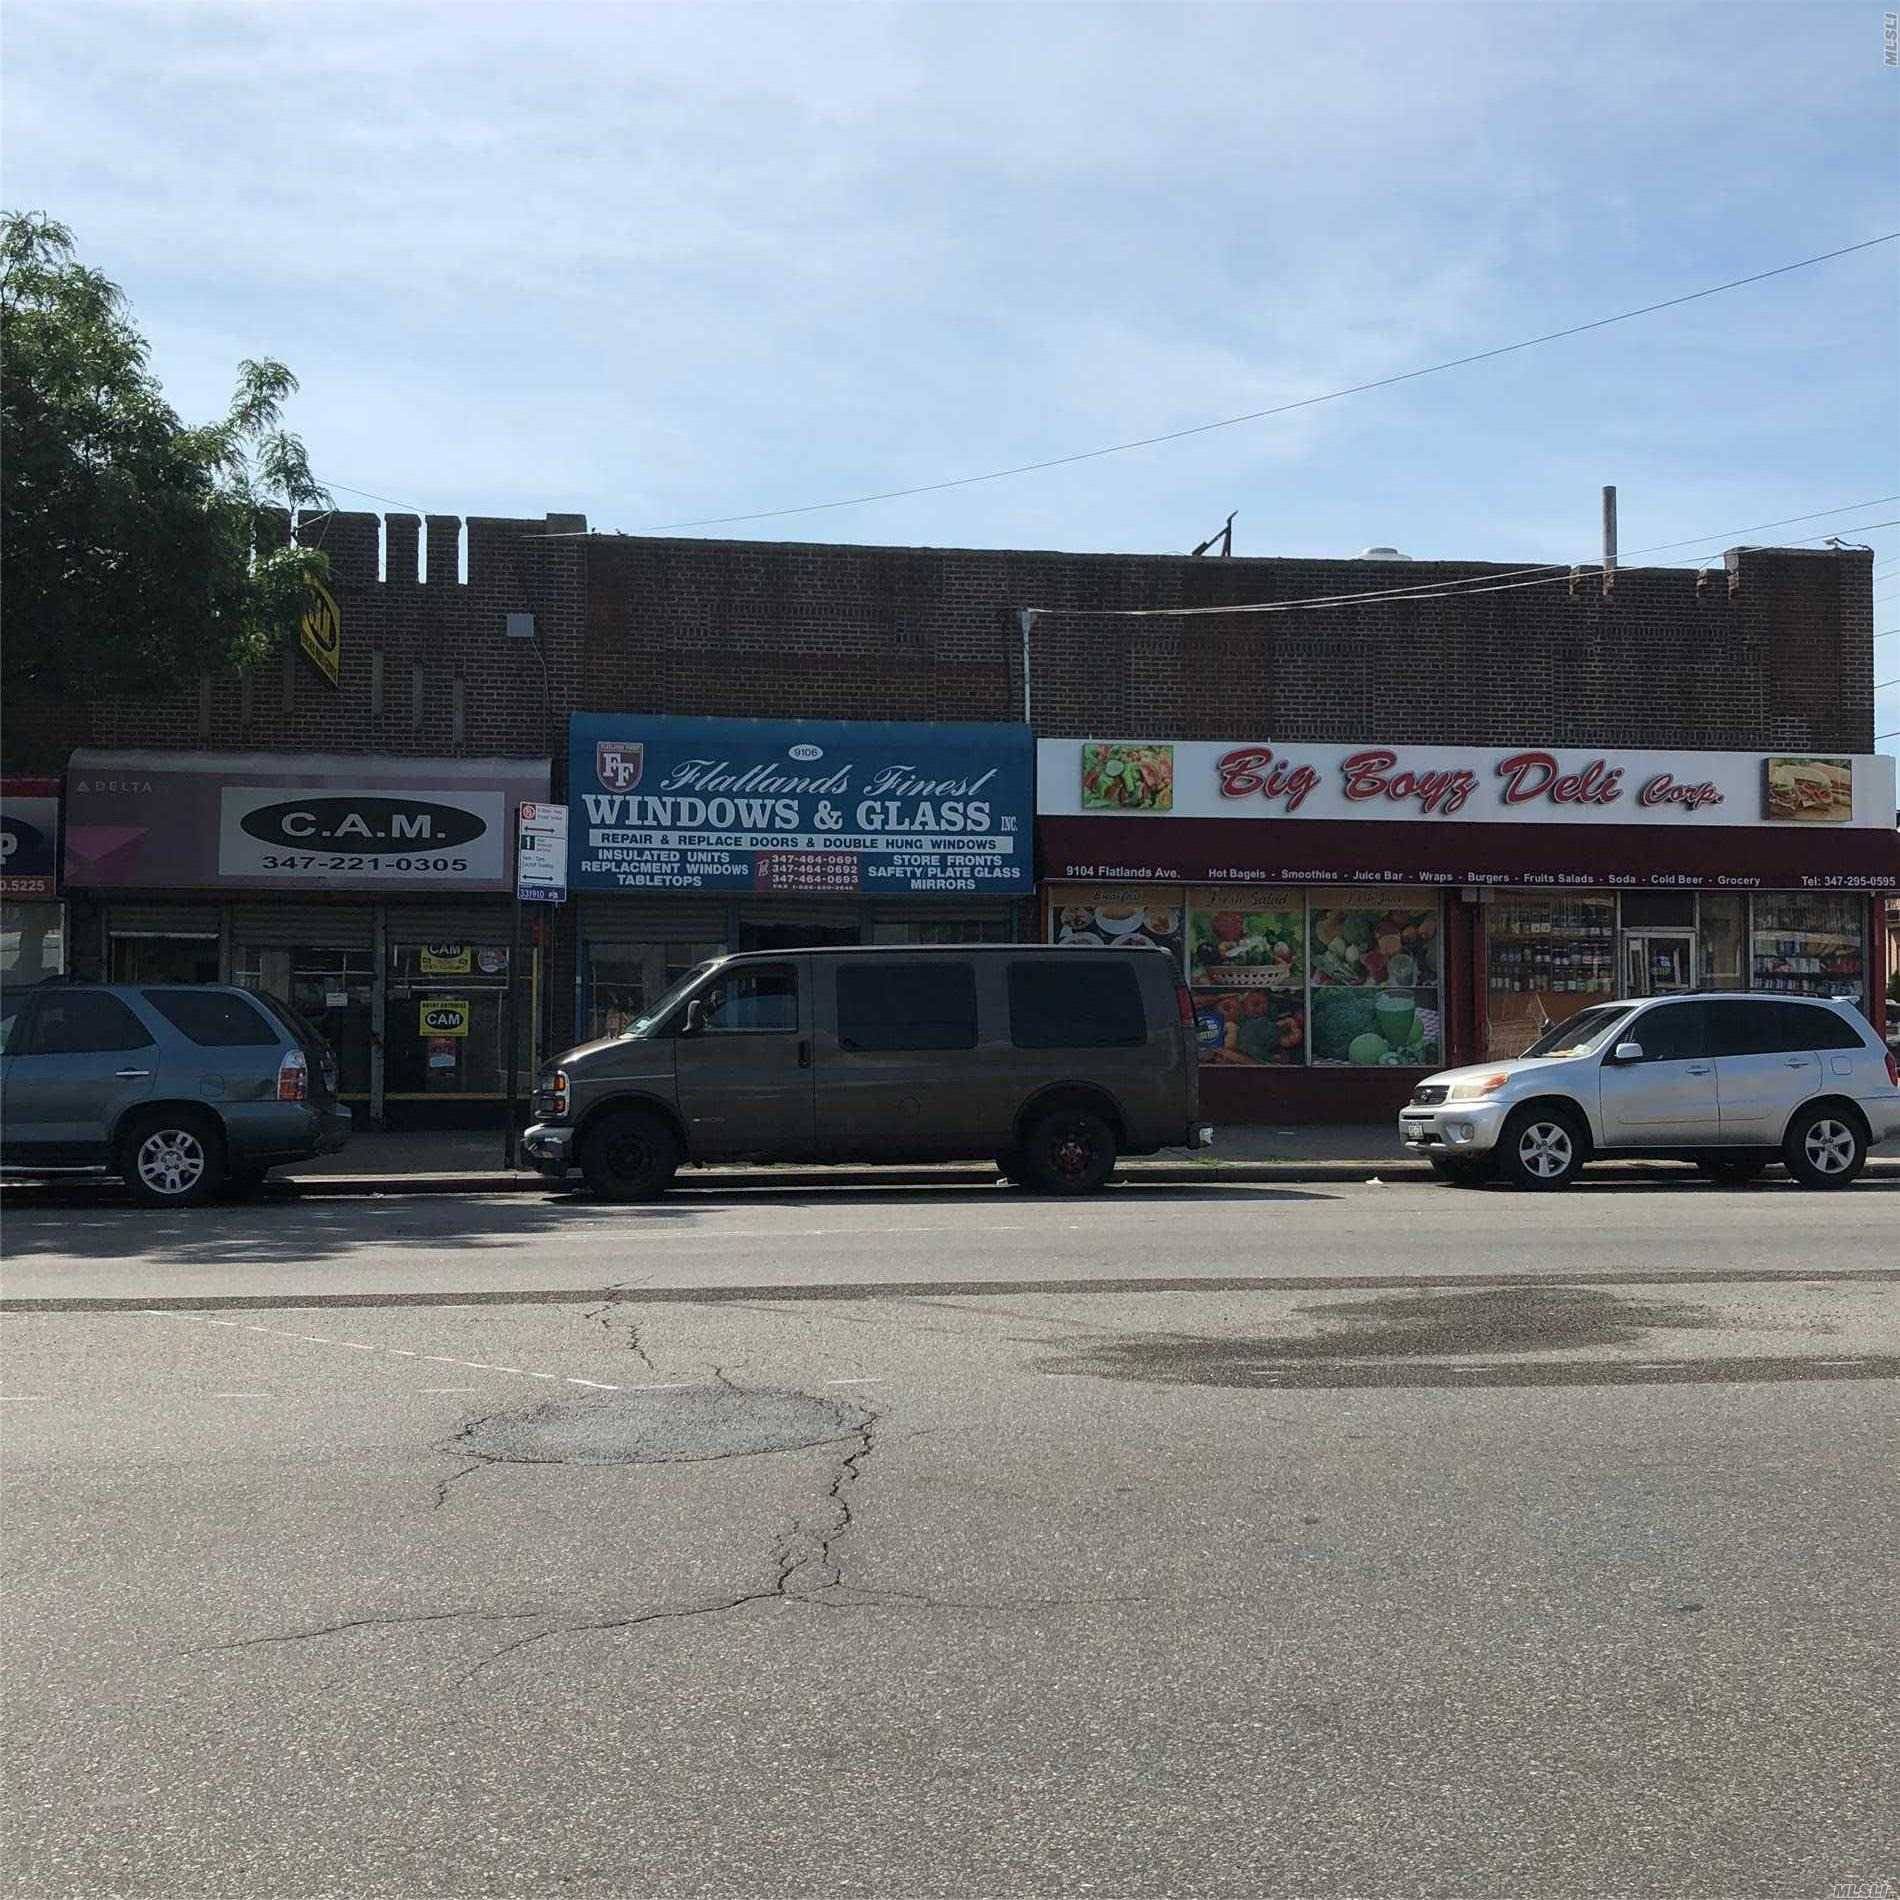 Commercial Building, Single Story, 6 Units With 150Ft Frontage On Flatlands Ave.